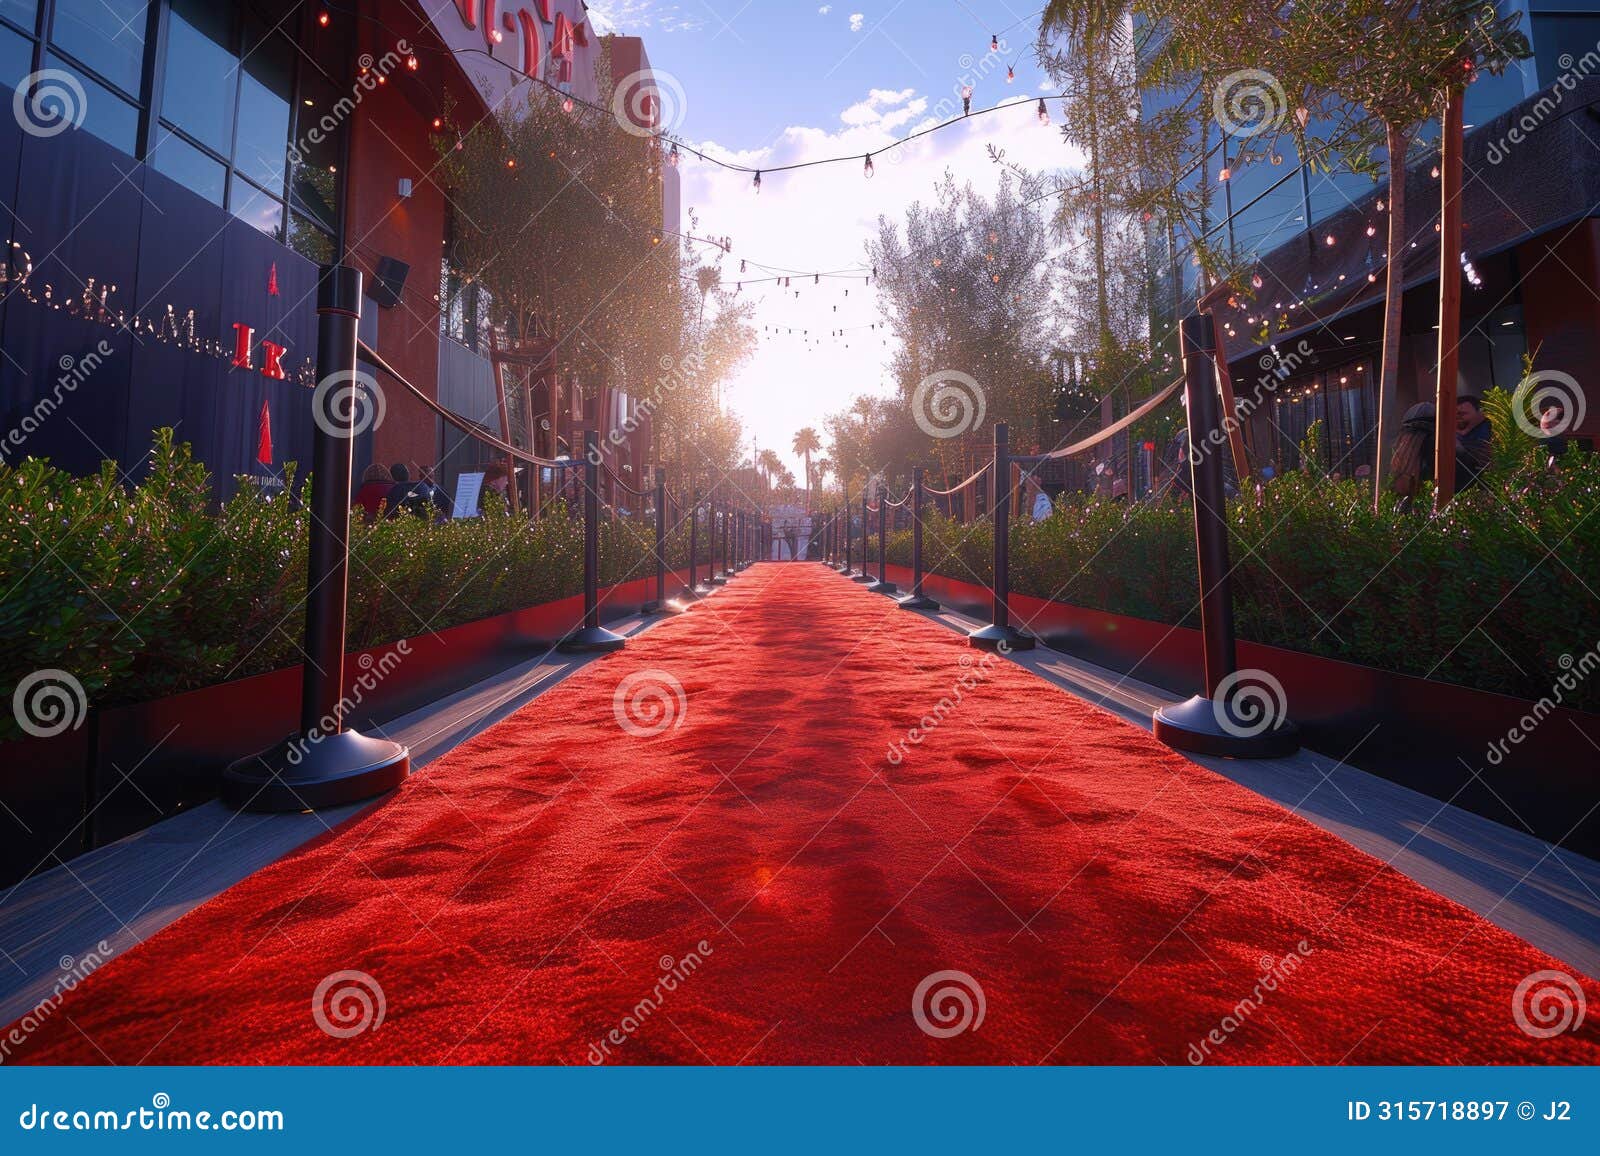 the red carpet stretches towards a setting sun, flanked by lights and greenery, ready for an evening of glitz at a high